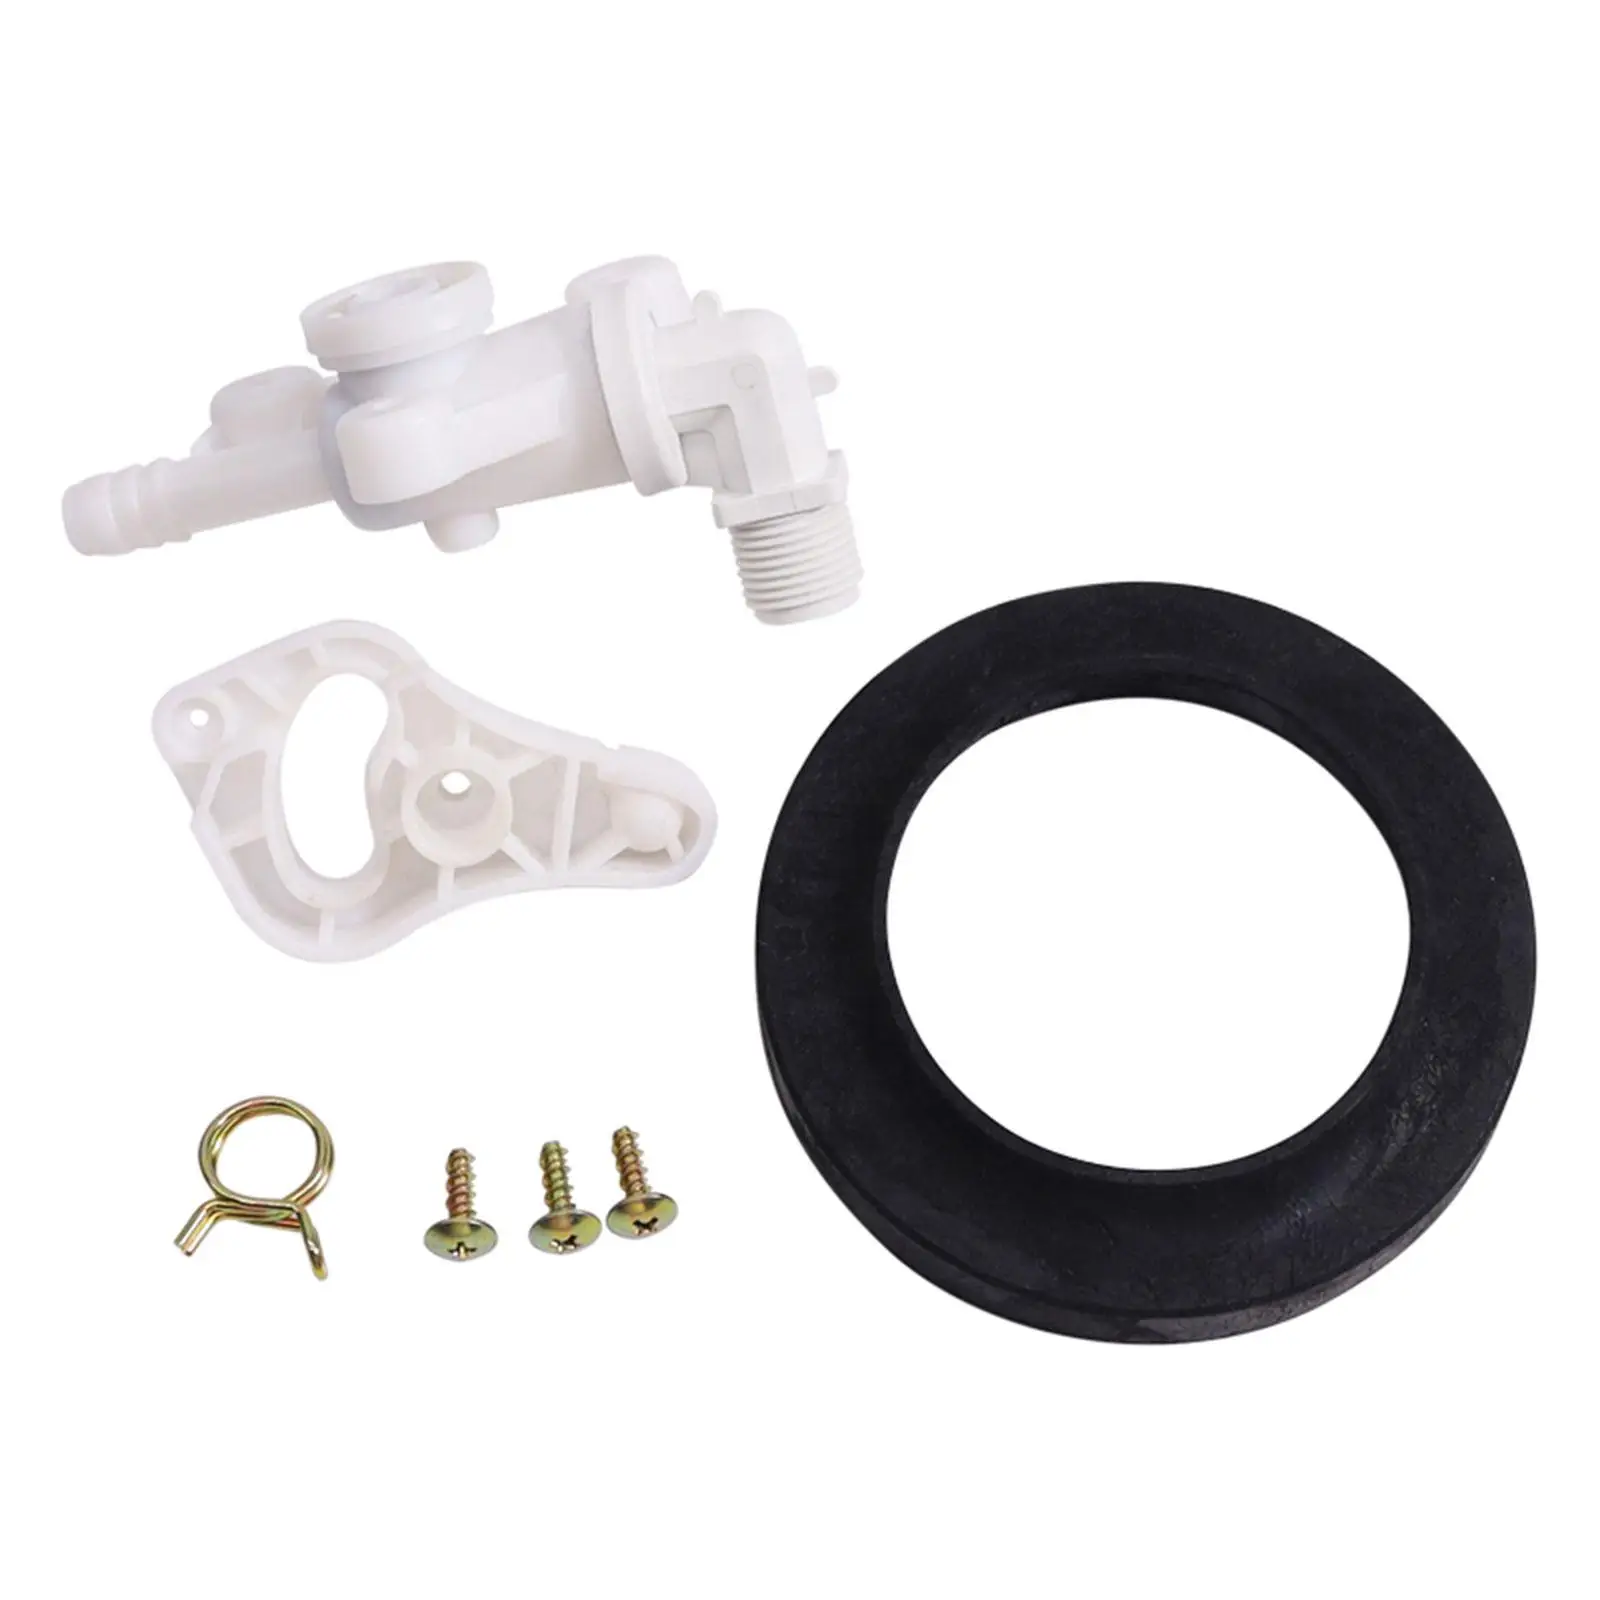 34100 Water Valve with Seal Practical Replace for Style Plus Toilets